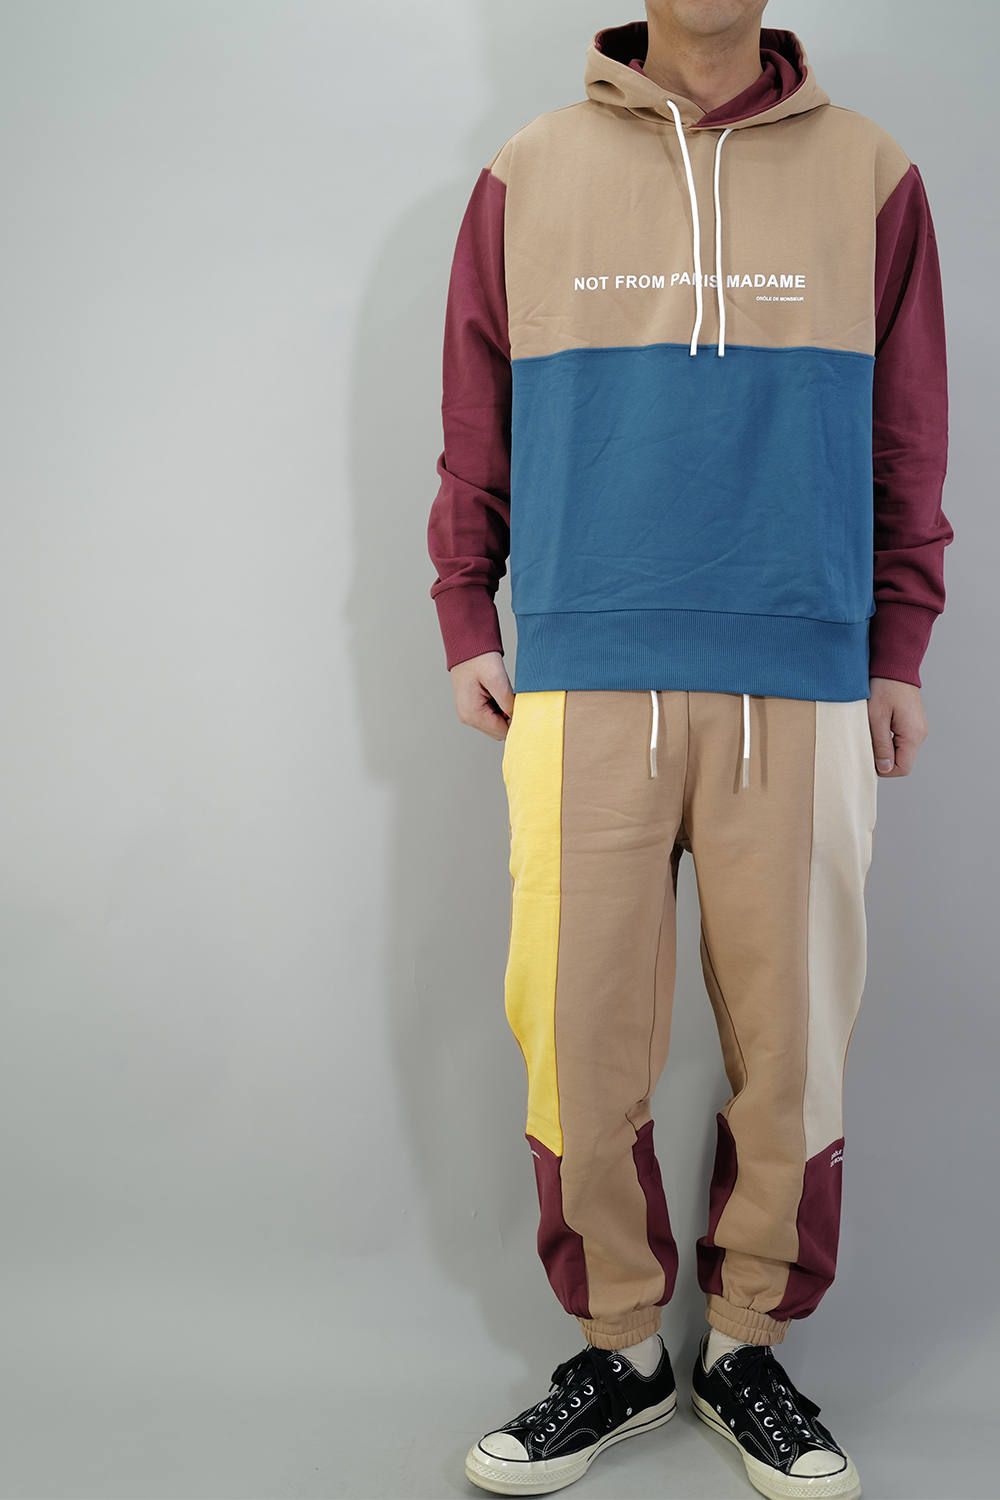 DROLE DE MONSIEUR -ドロールドムッシュ- 2020 S&S collection | River